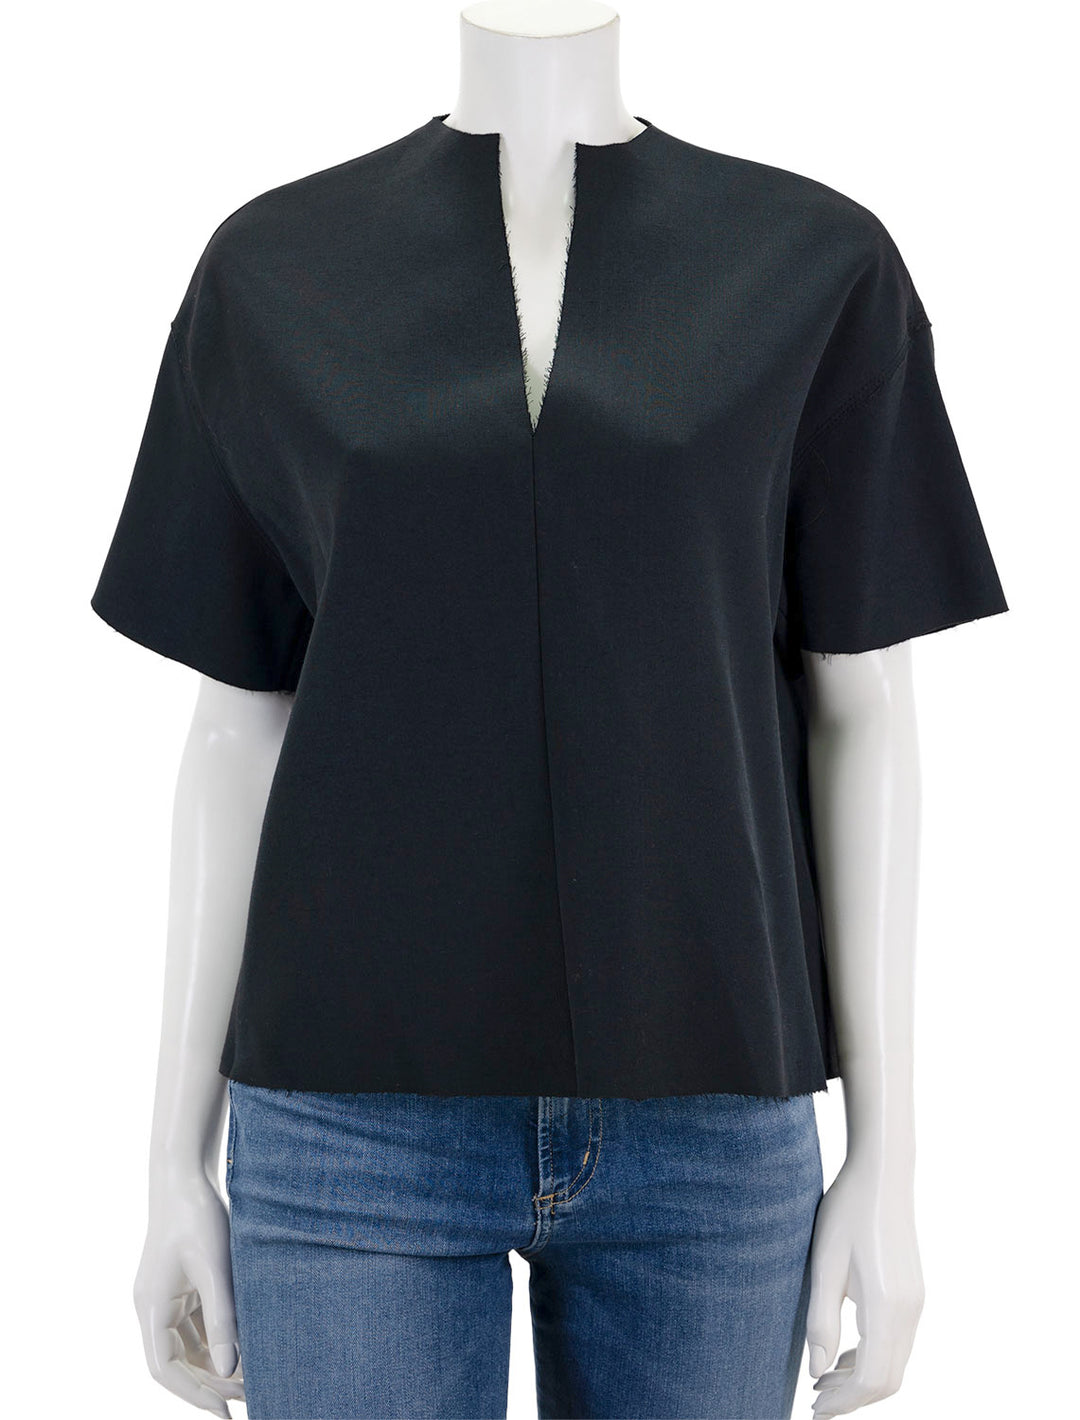 Front view of STAUD's amigoni top in black.